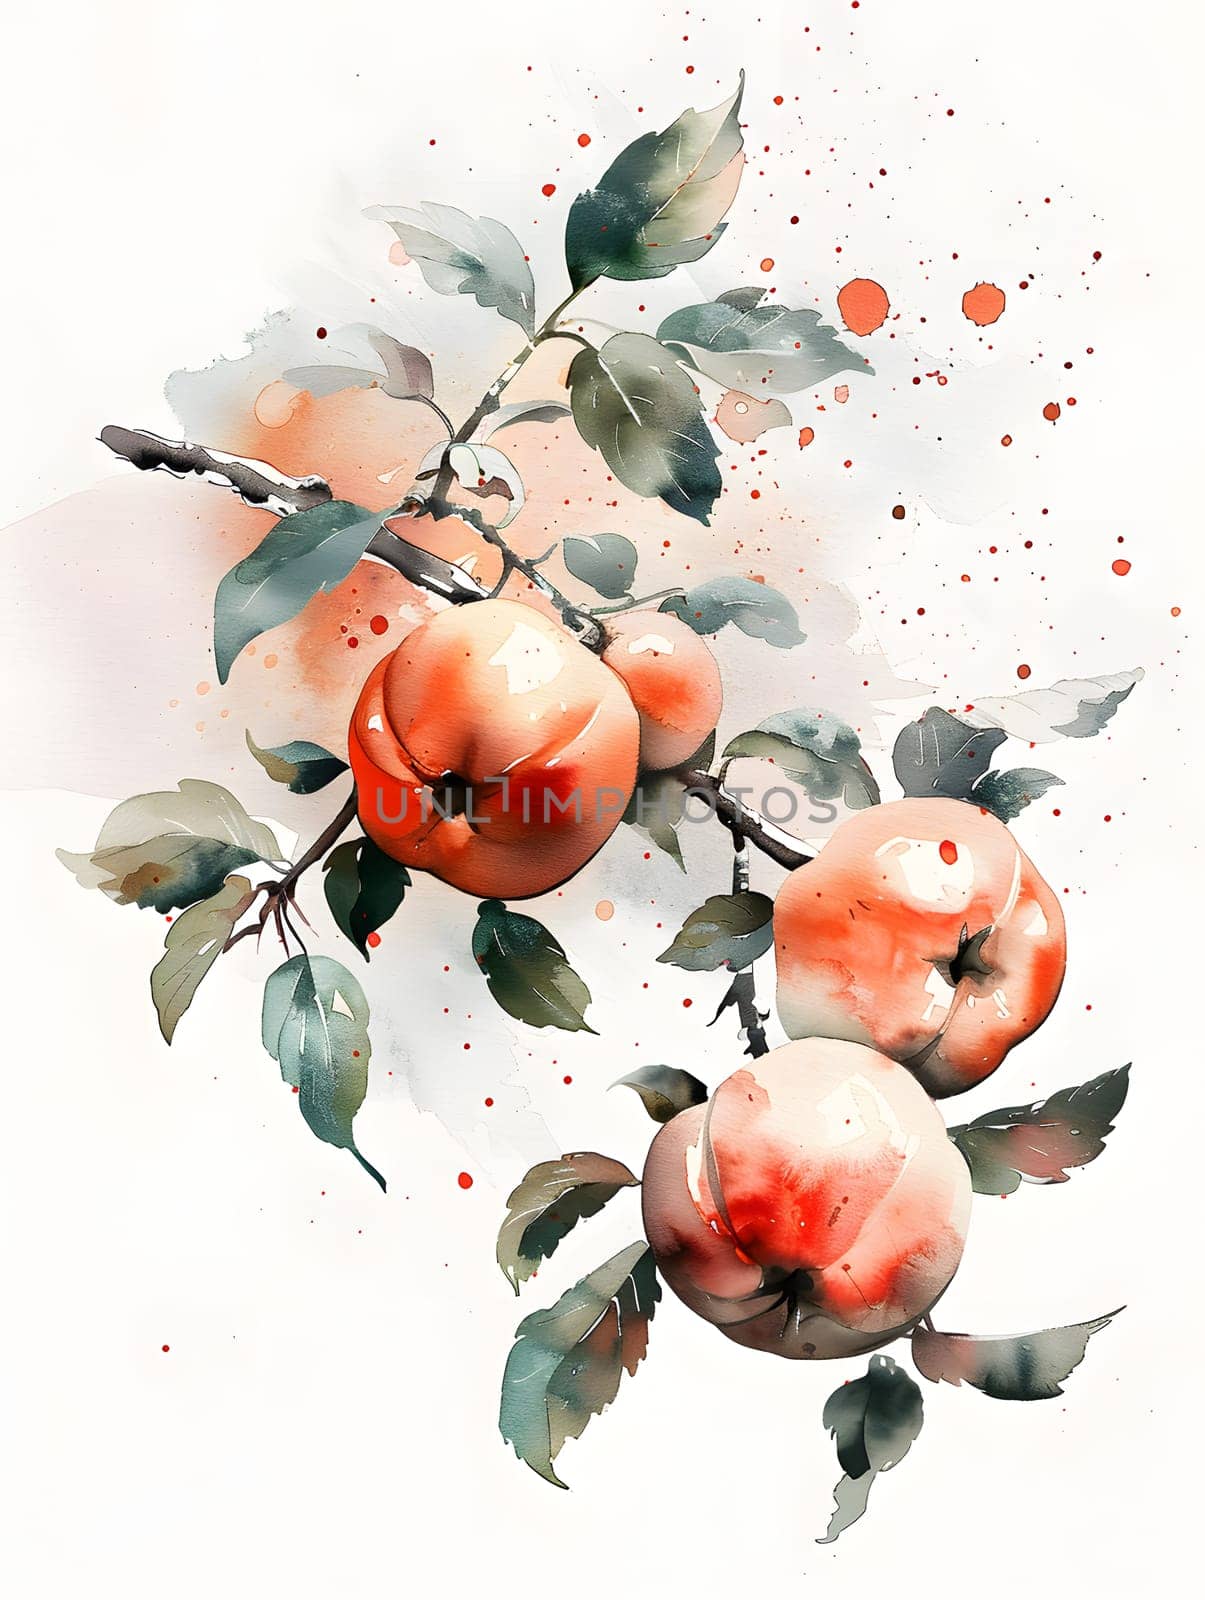 A watercolor painting depicting three apples on a tree branch. The artwork captures the beauty of natural foods and the intricate details of the fruit, plant, and twig